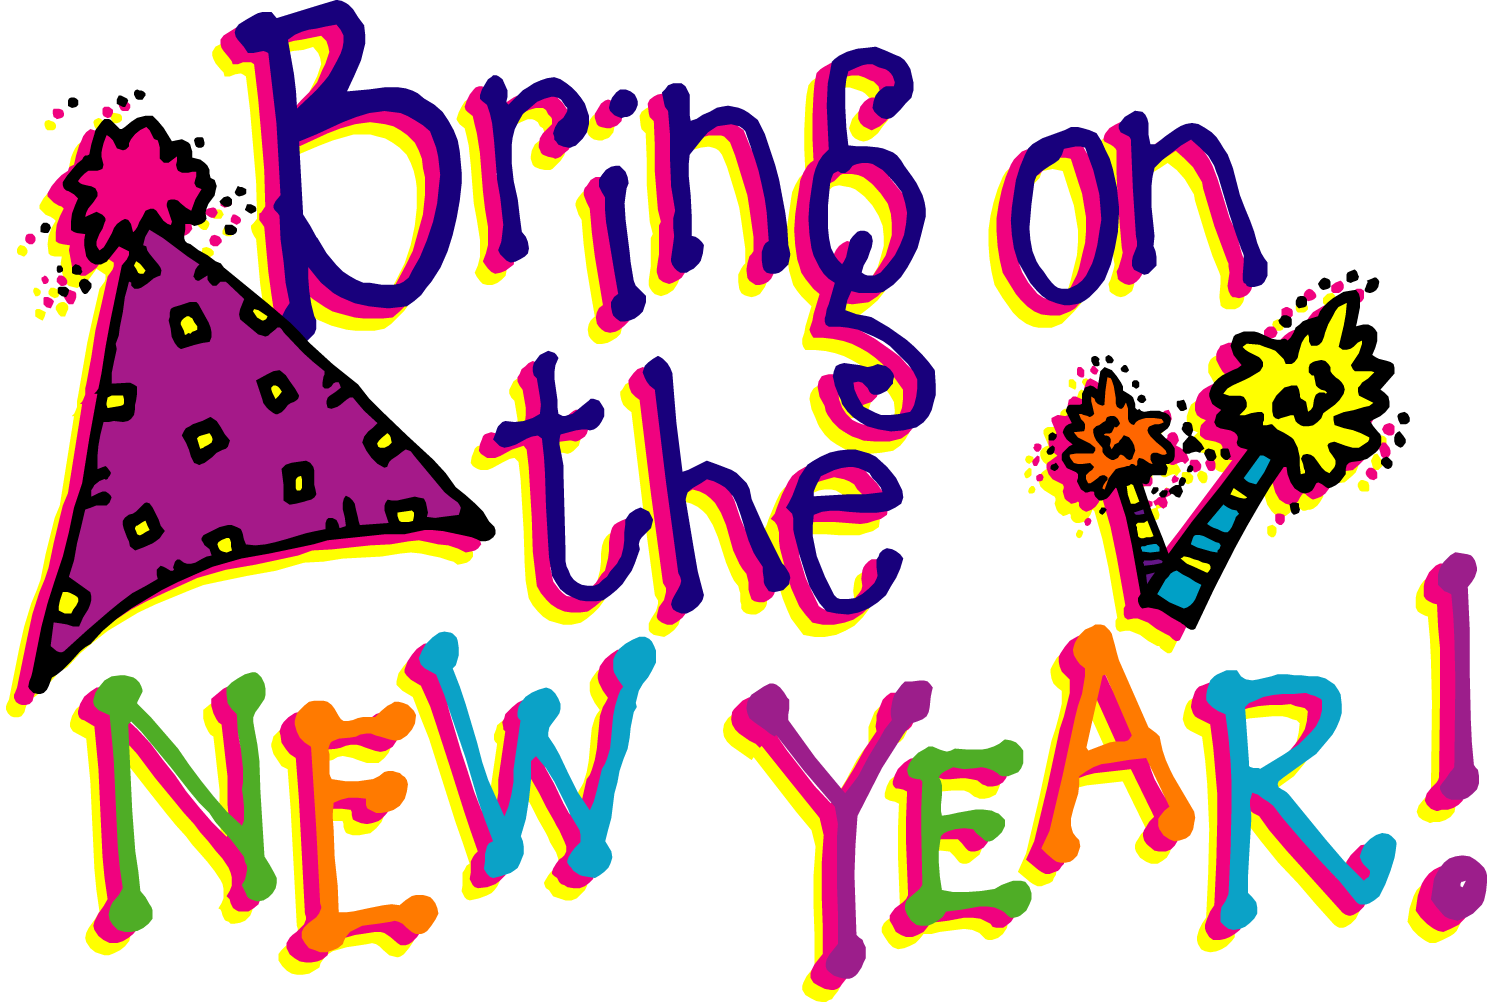 ... New Yearu0026#39;s Eve 2016 u0026middot; Graphics And Or Fonts Copyright Dianne J Hook